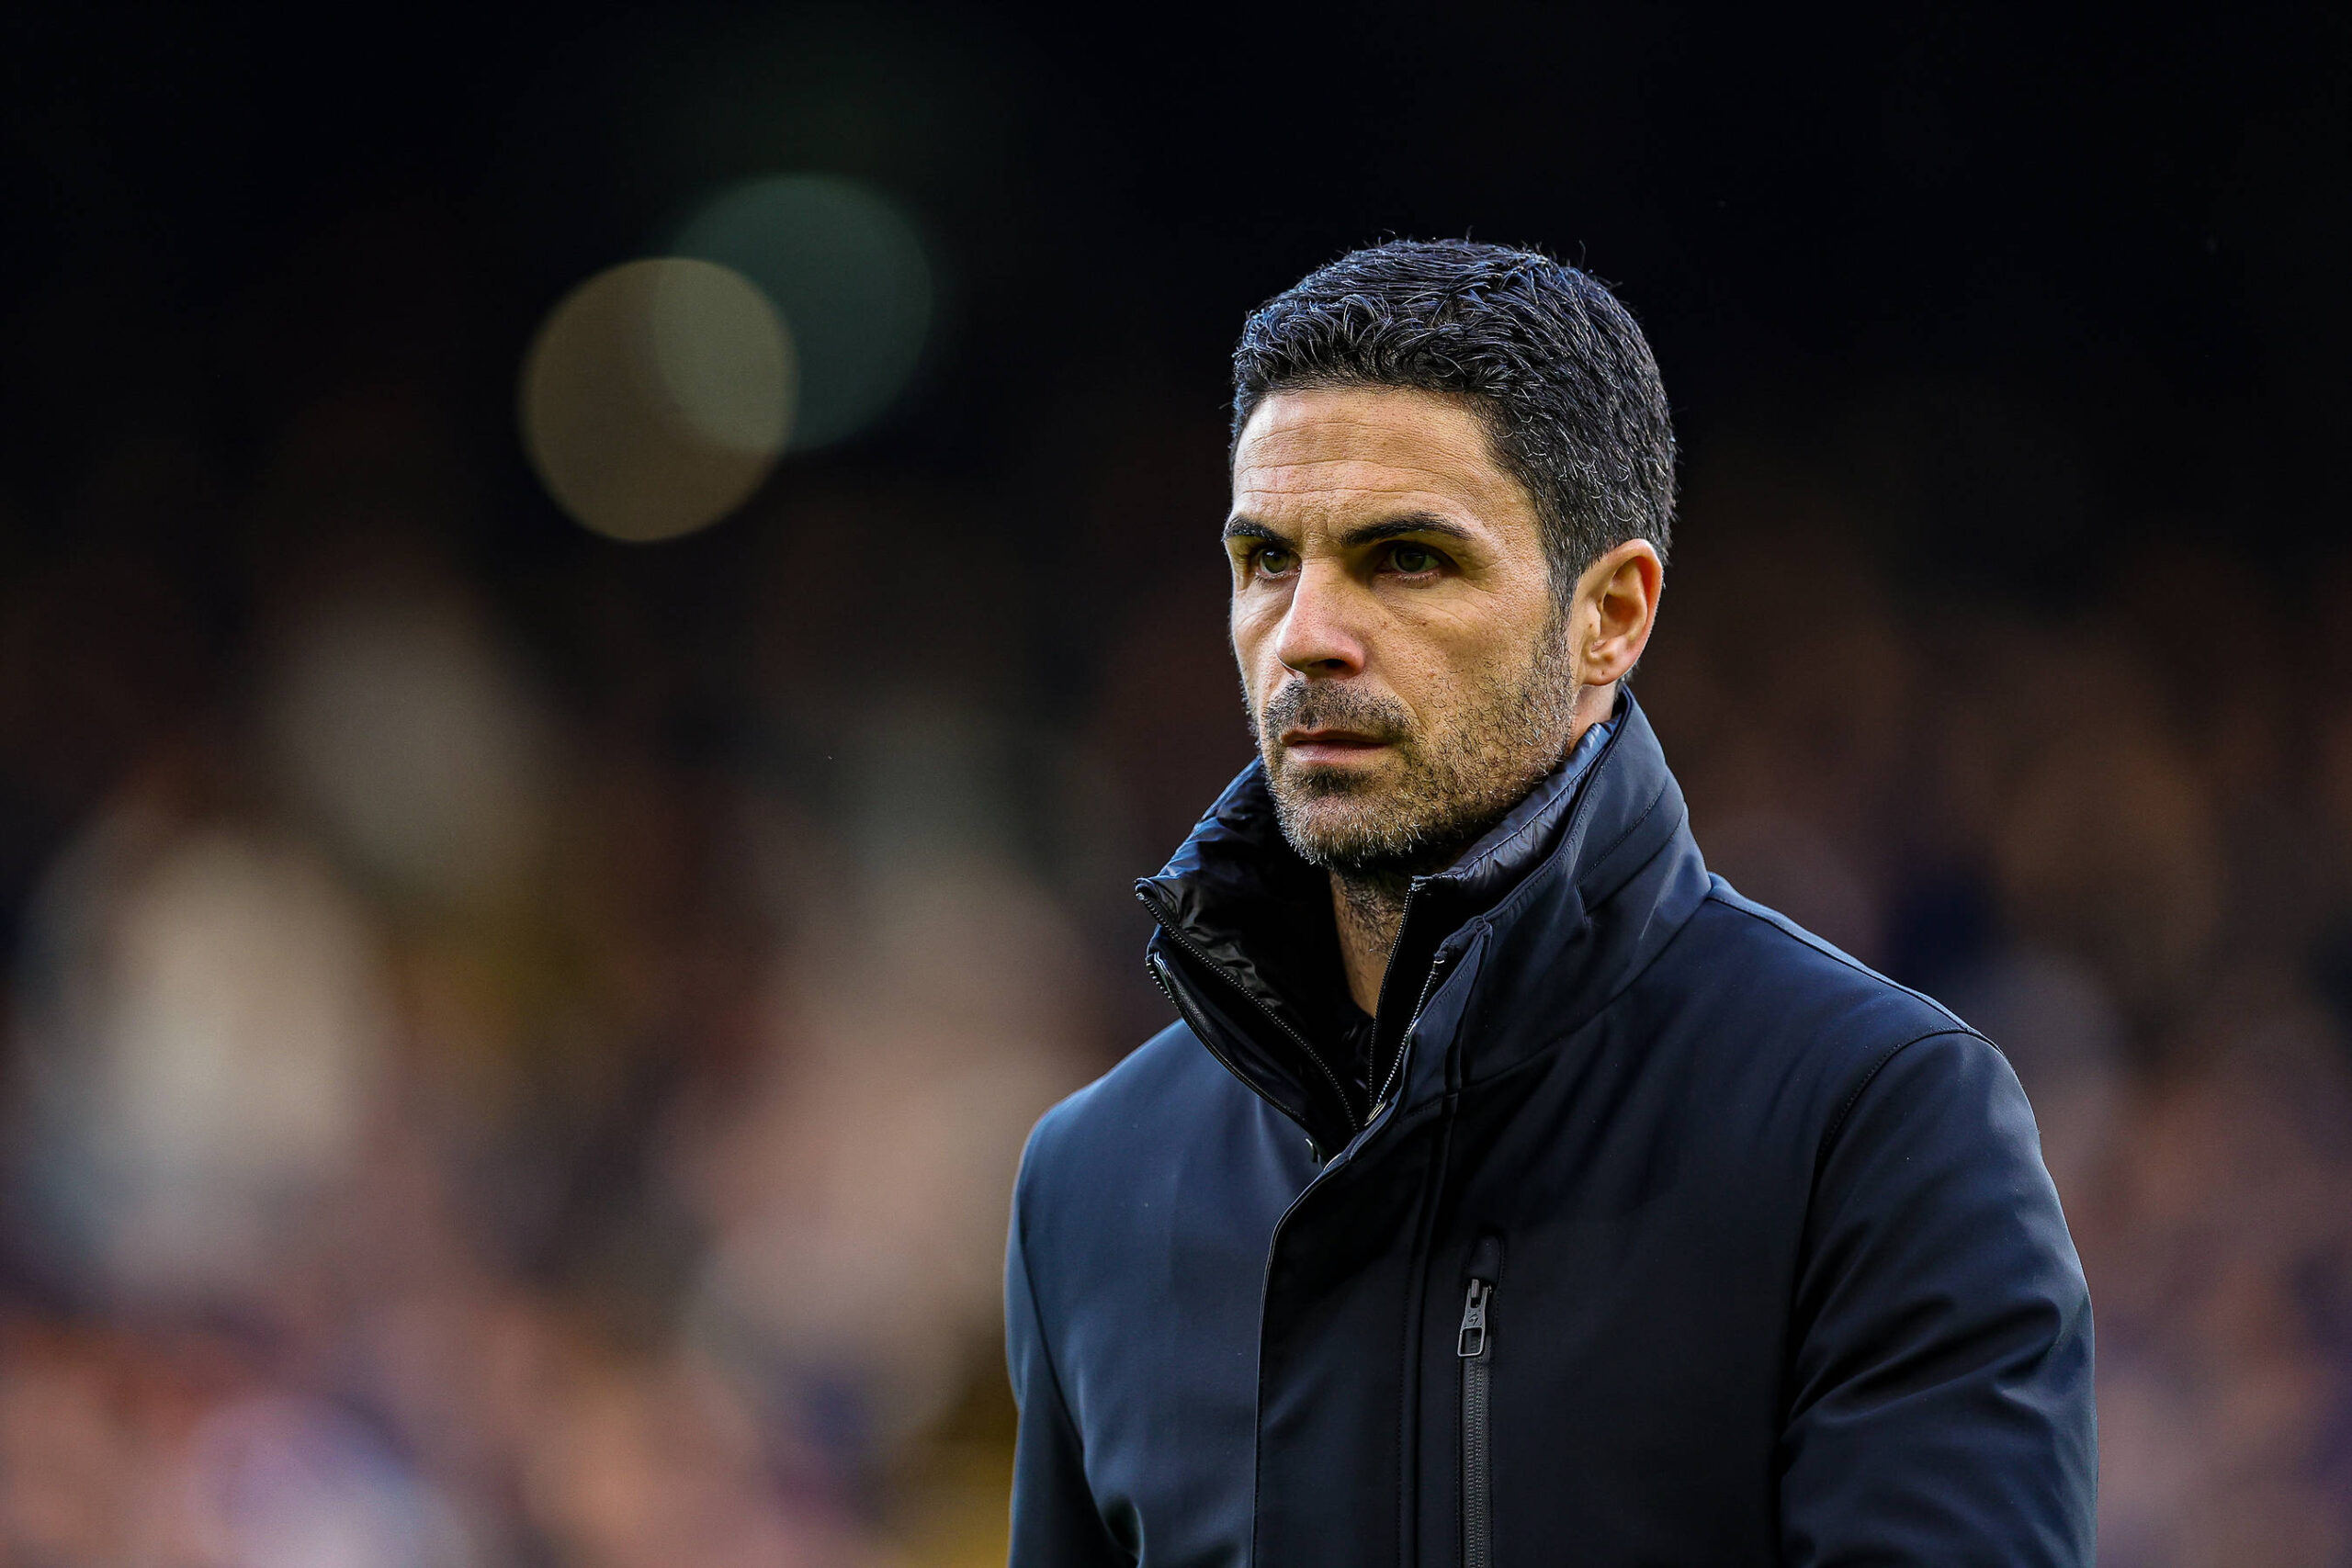 Arsenal's Mikel Arteta has revealed his stance on rumours he could take over from Barcelona manager Xavi